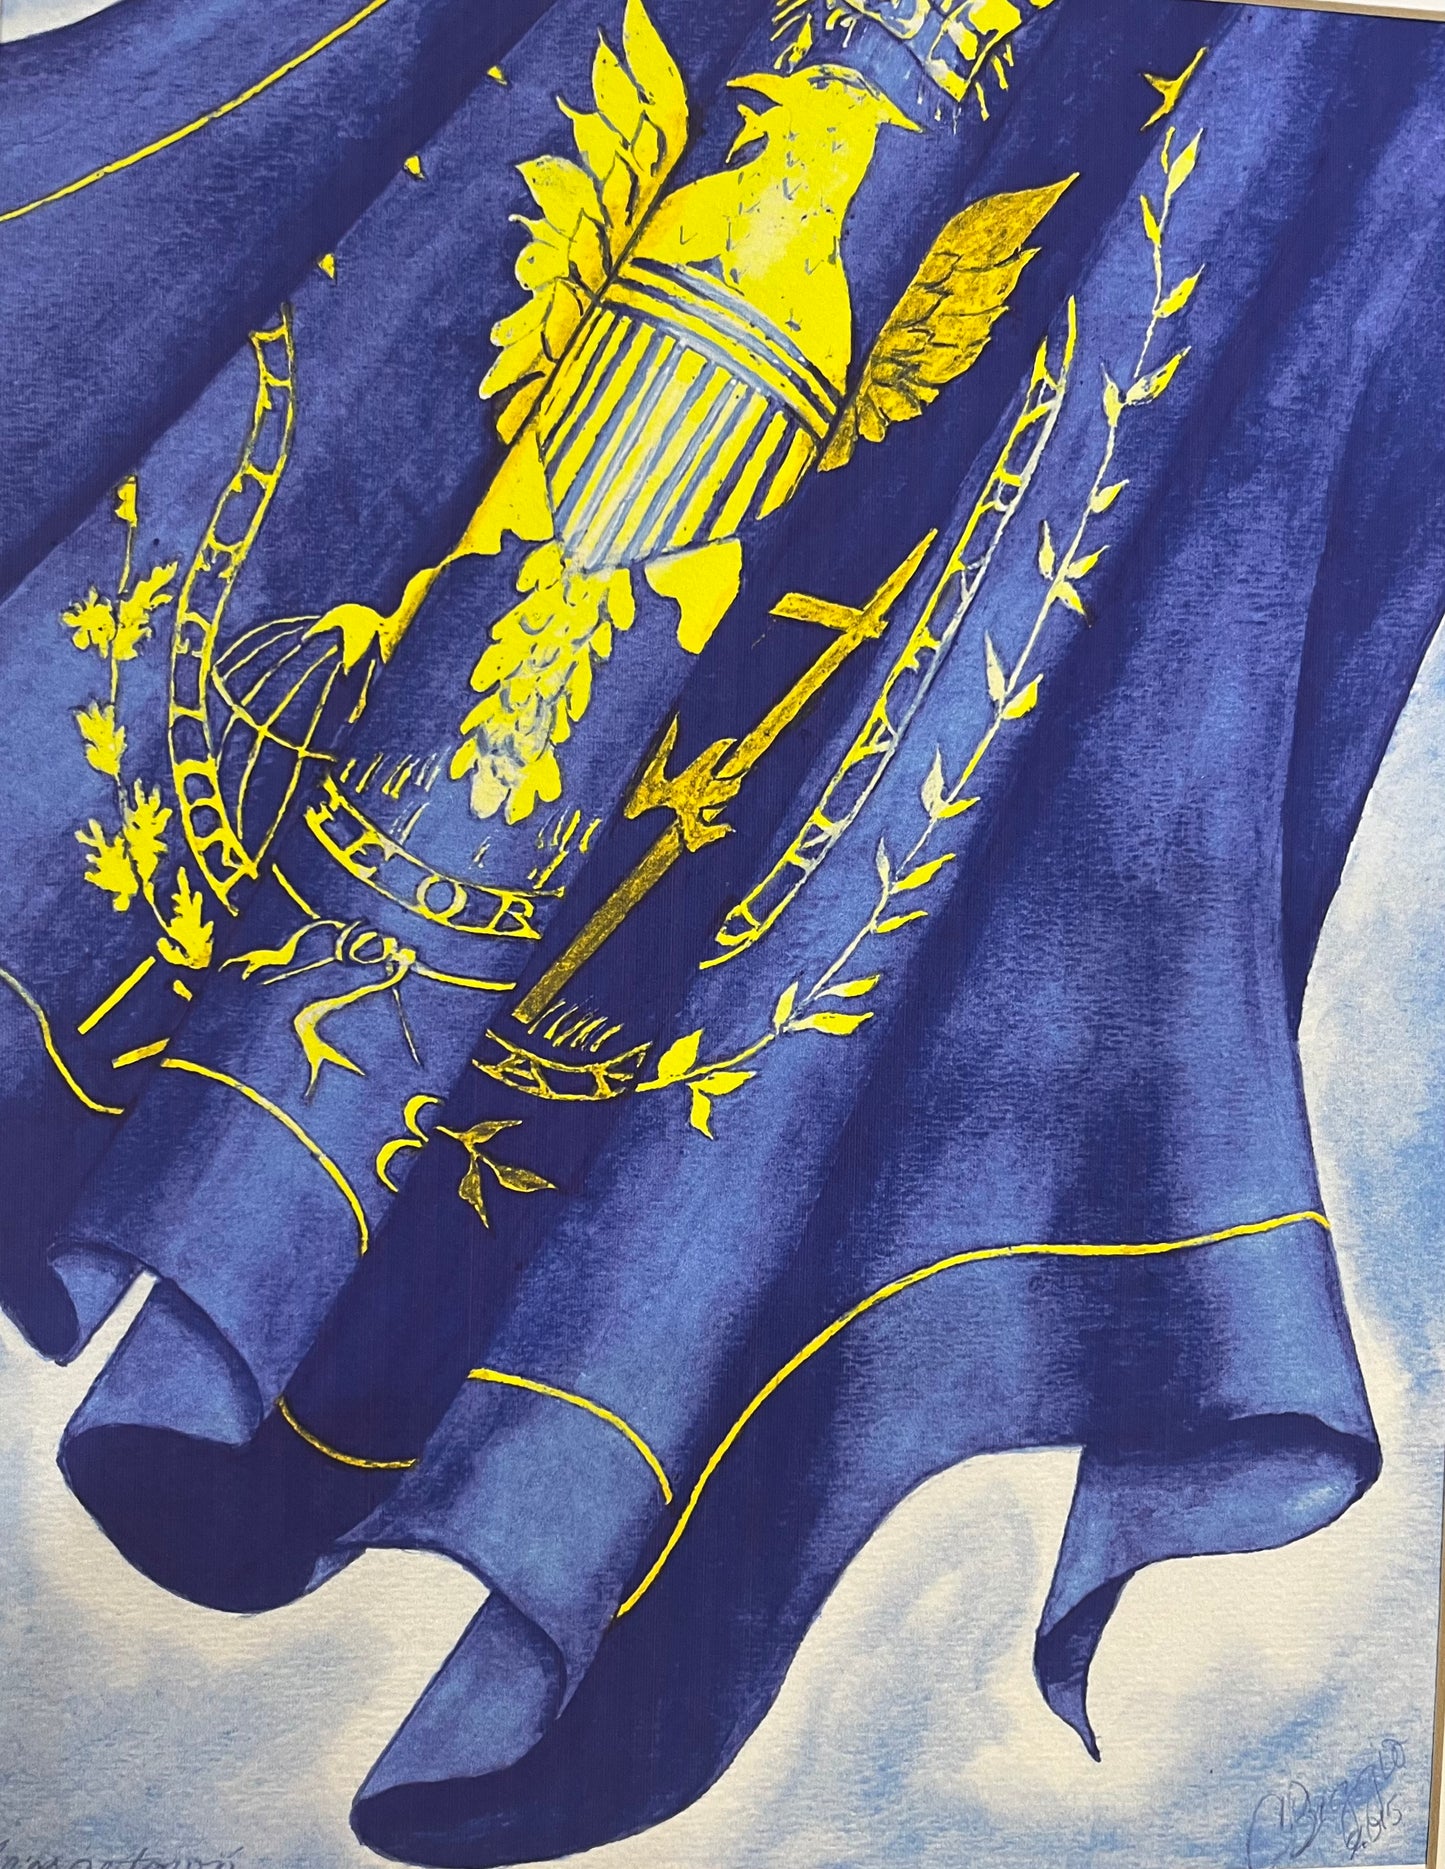 Georgetown University Fine Art Flag with Georgetown Crest by Carole Moore Biggio | 11" by 14"